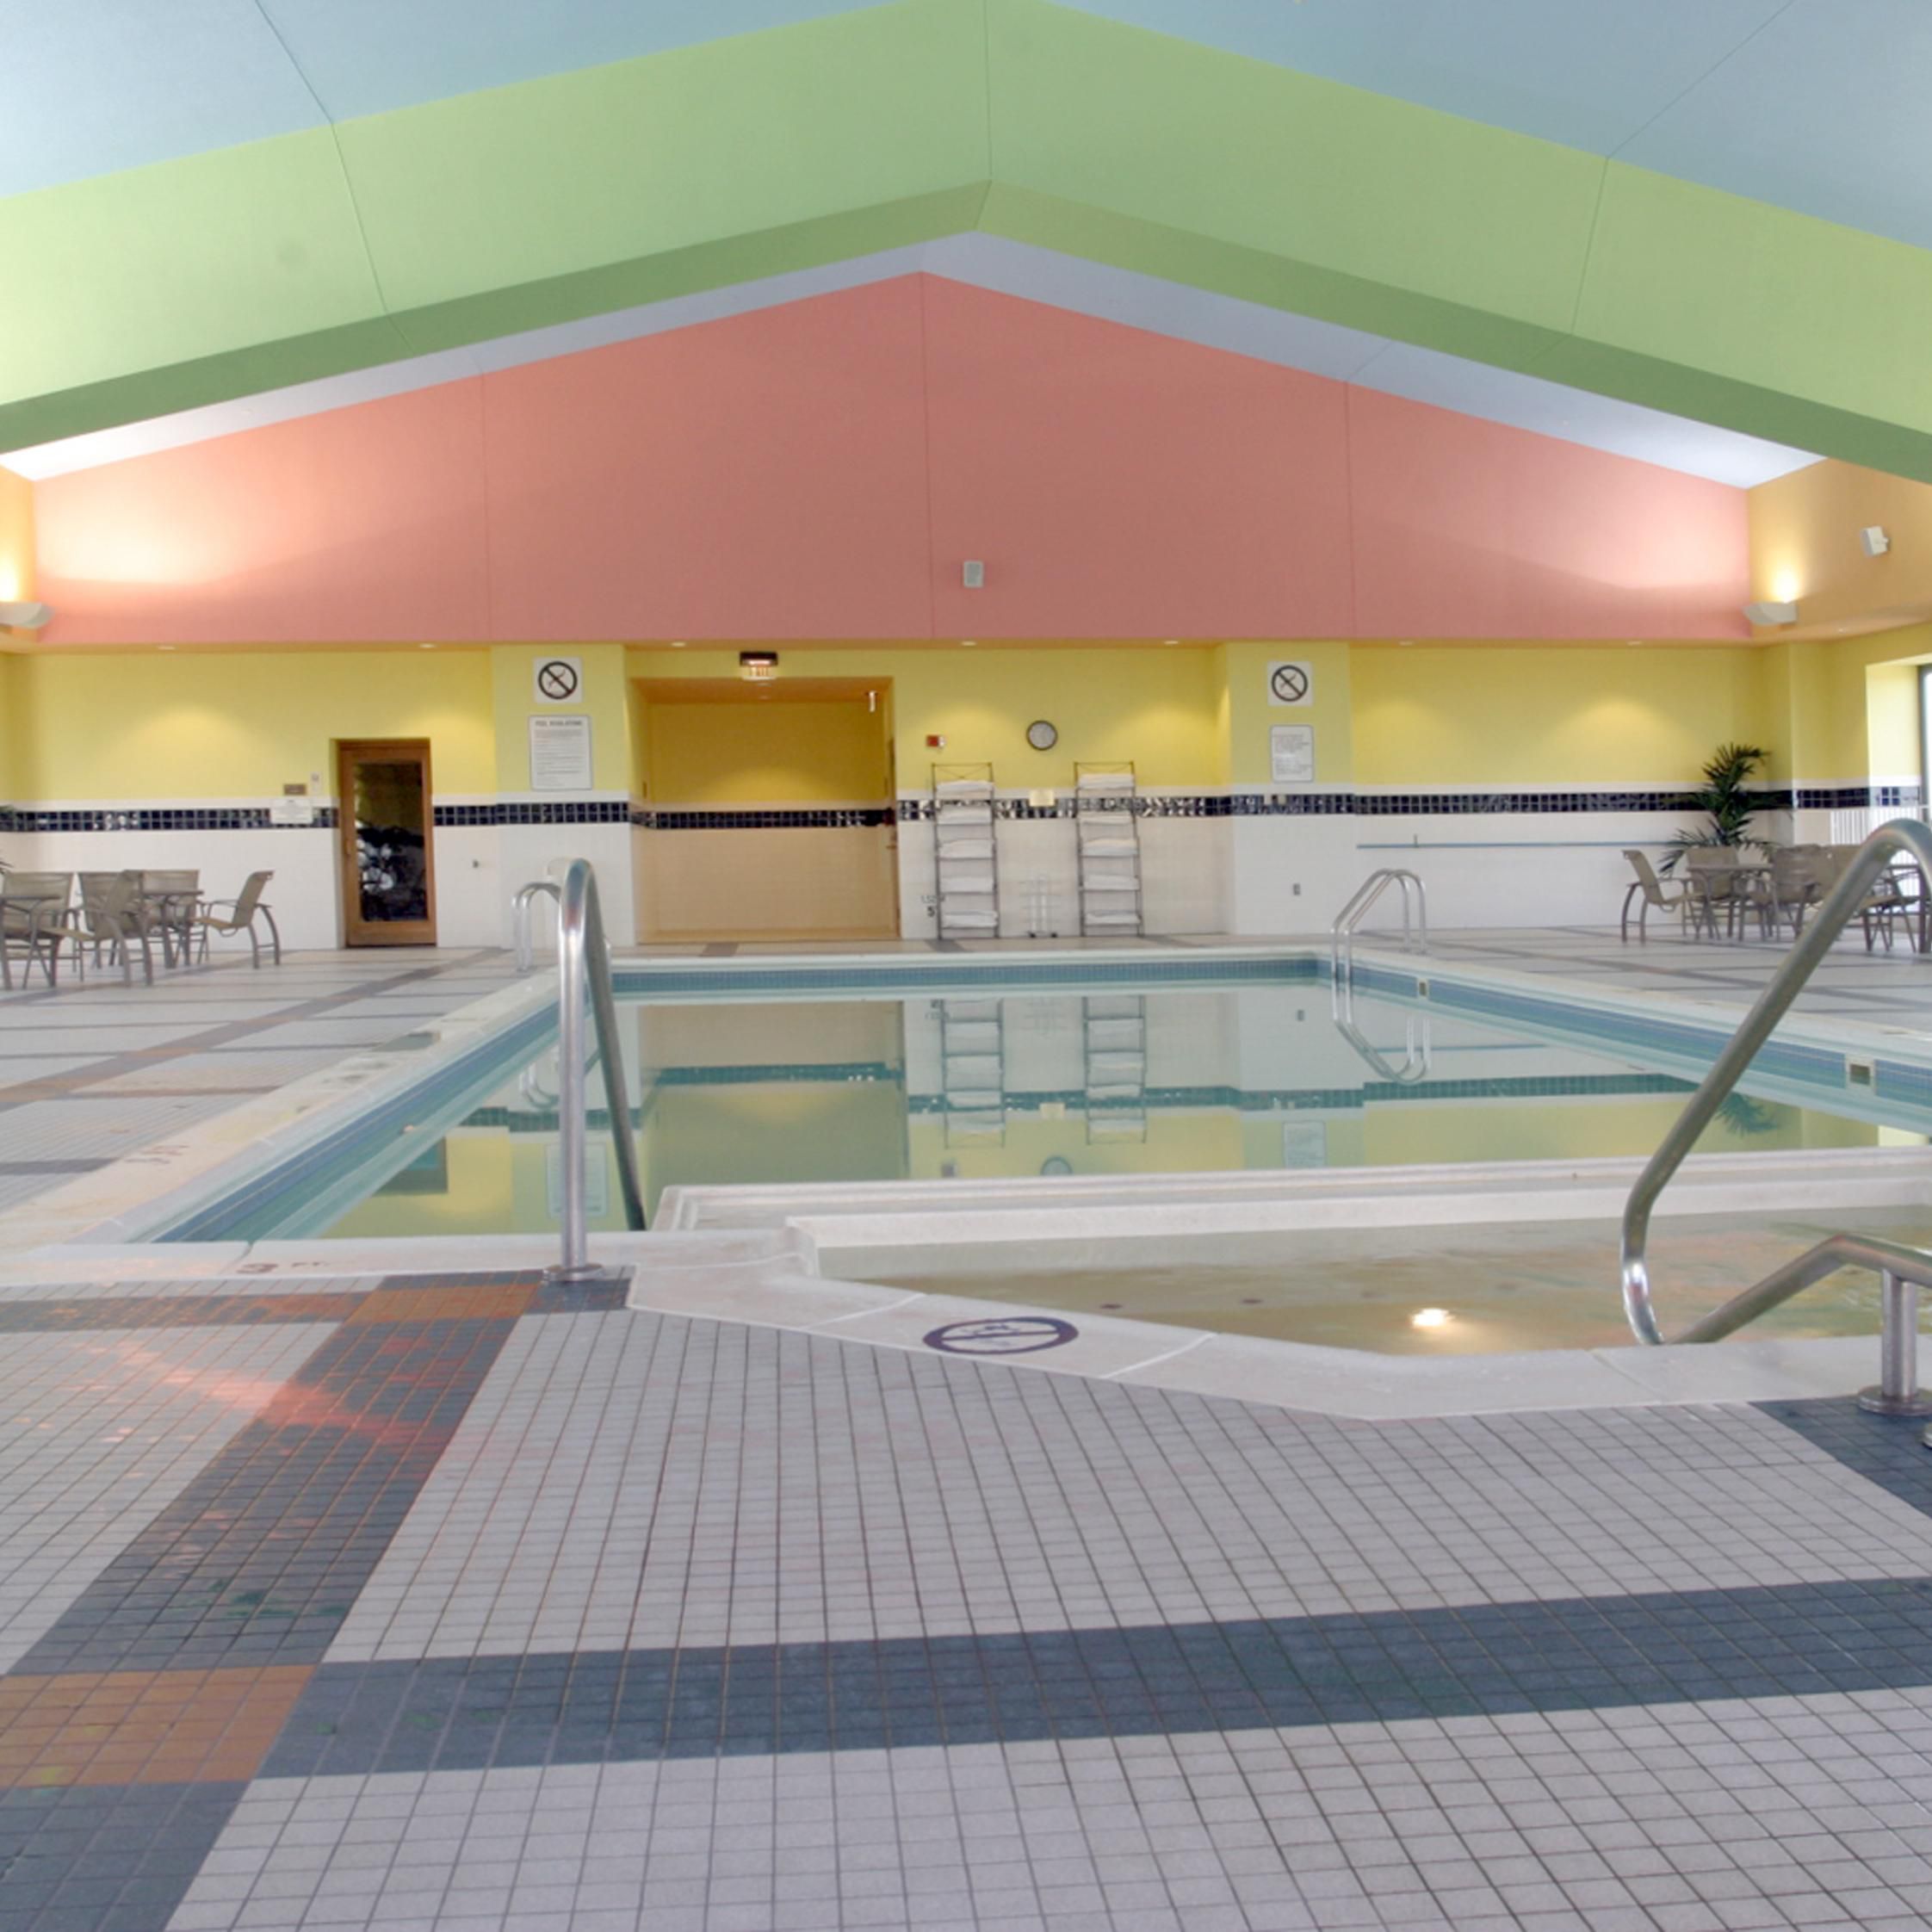 Have fun in the indoor swimming pool after visiting Lincoln Sites.